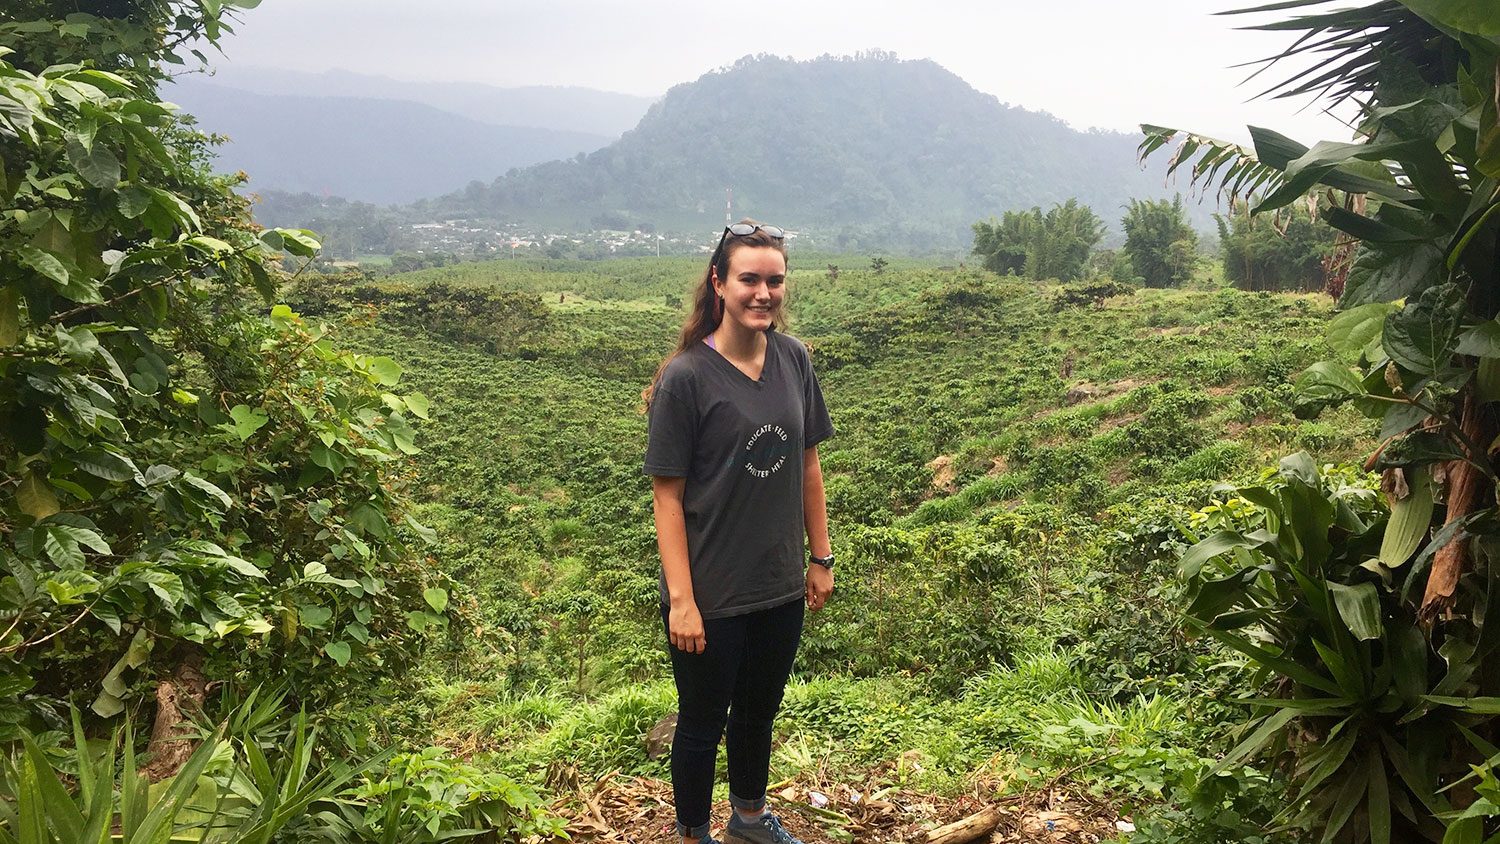 CALS student Kati Scruggs standing in the Guatemalan landscape